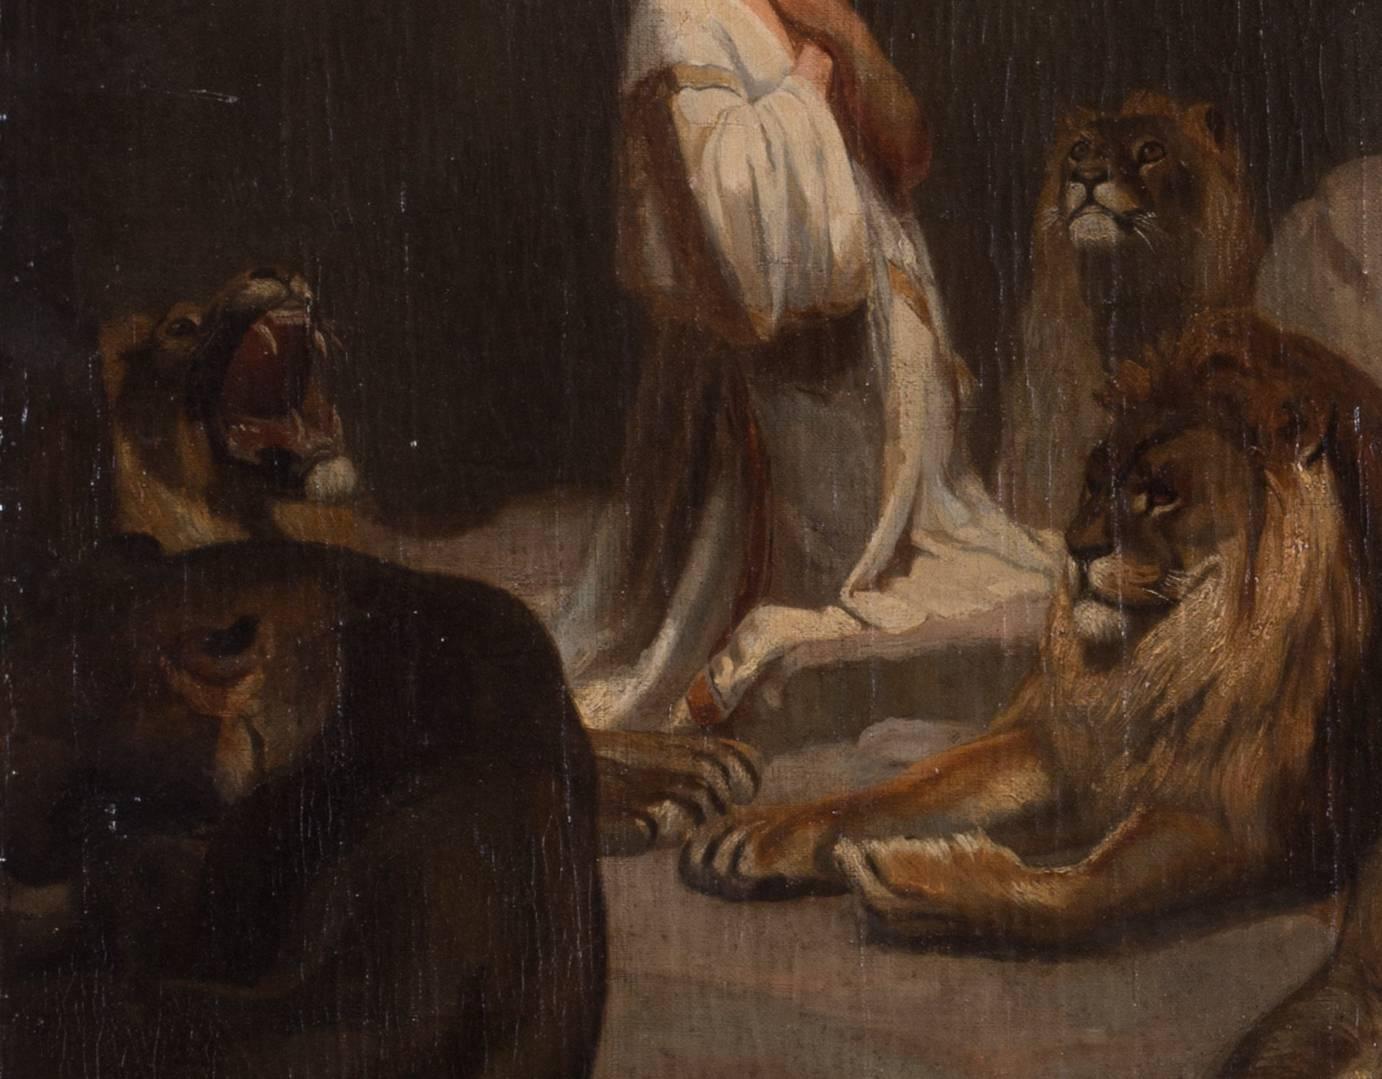 Daniel and the lions - Painting by Unknown